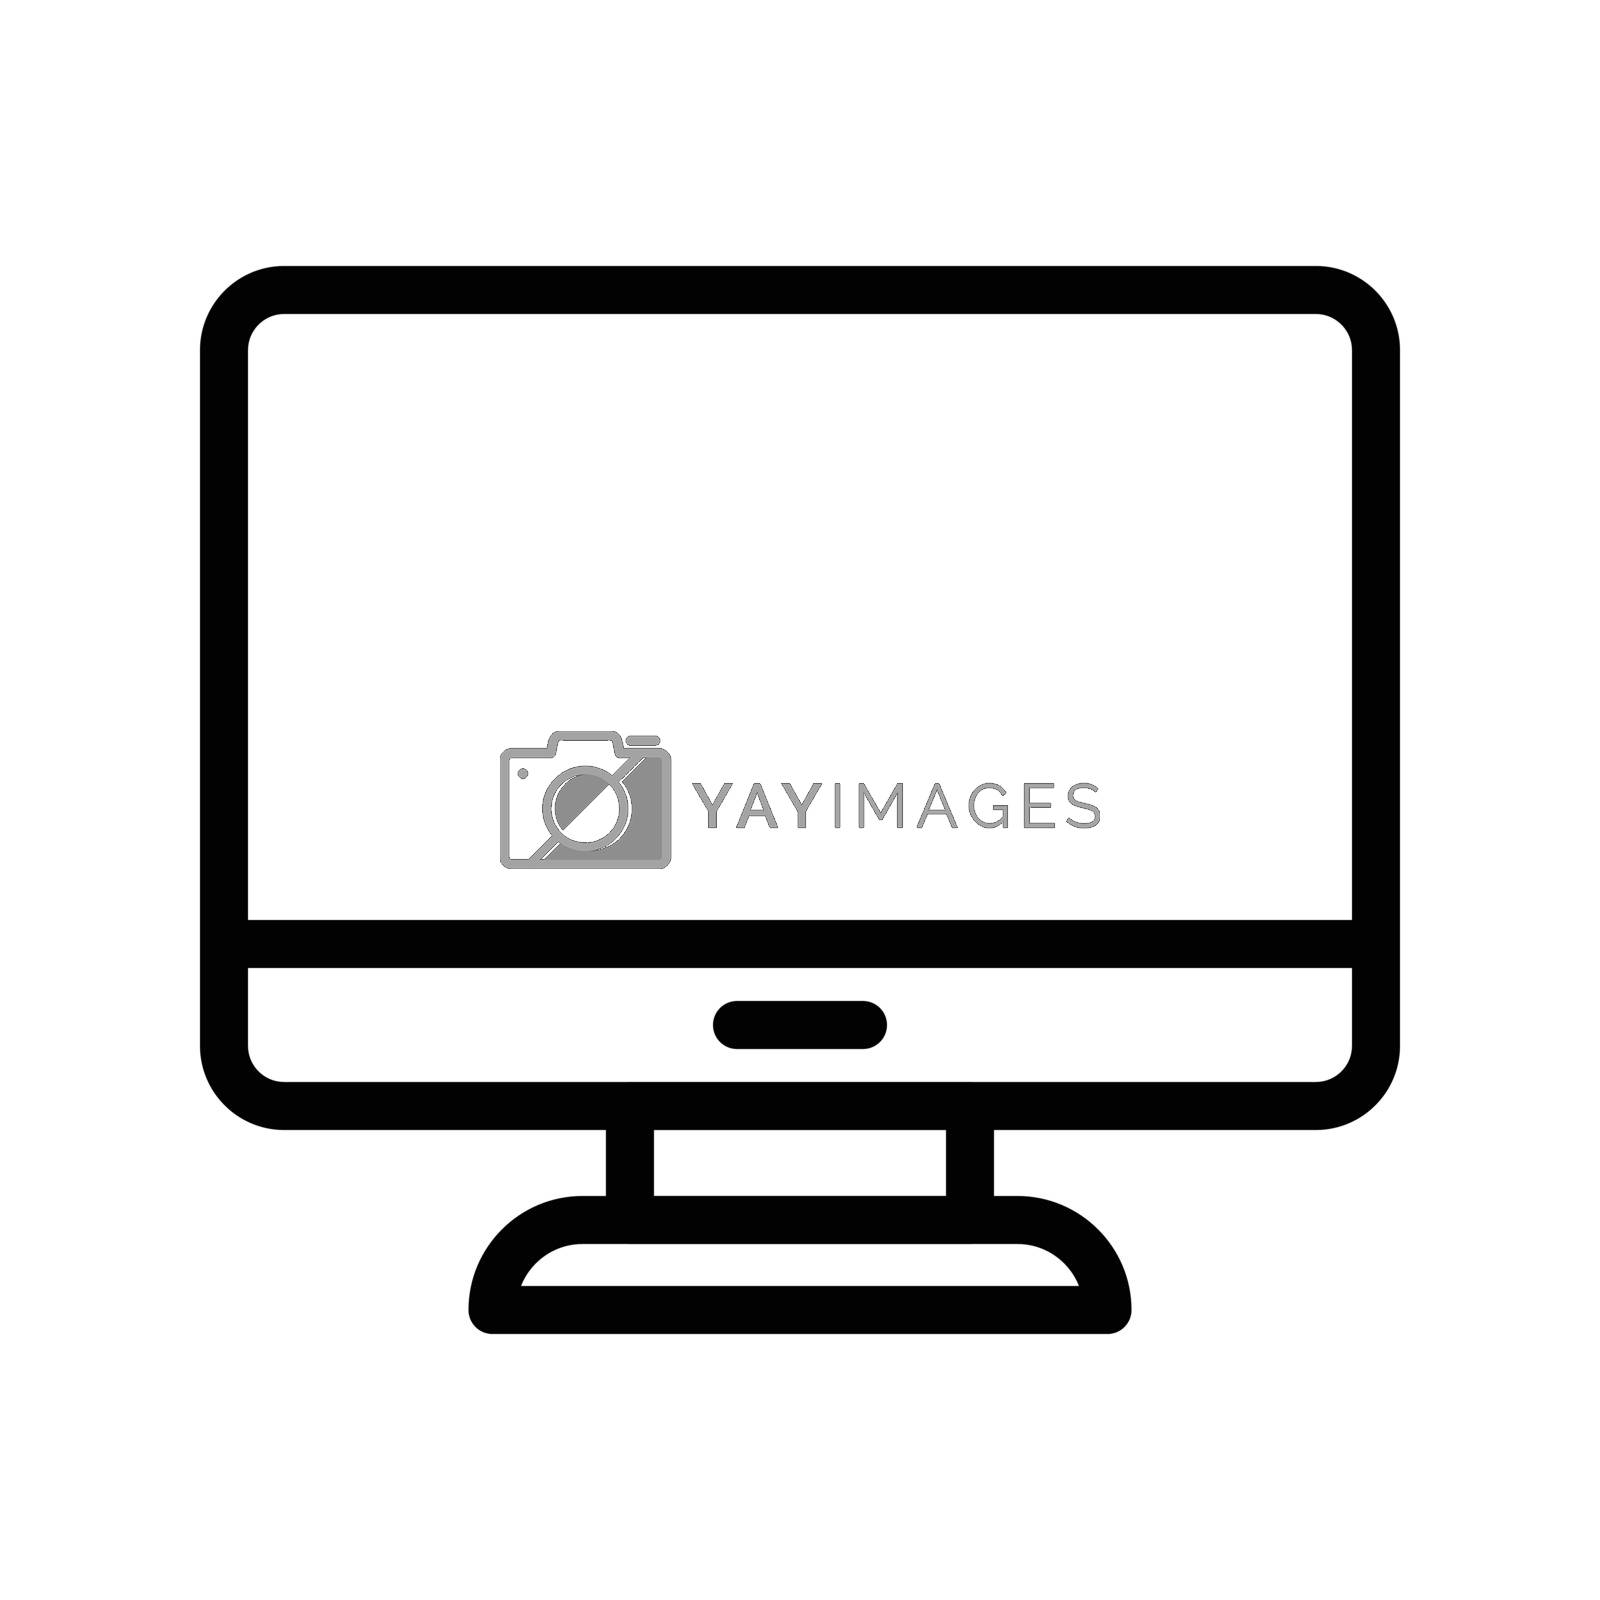 Royalty free image of display by vectorstall